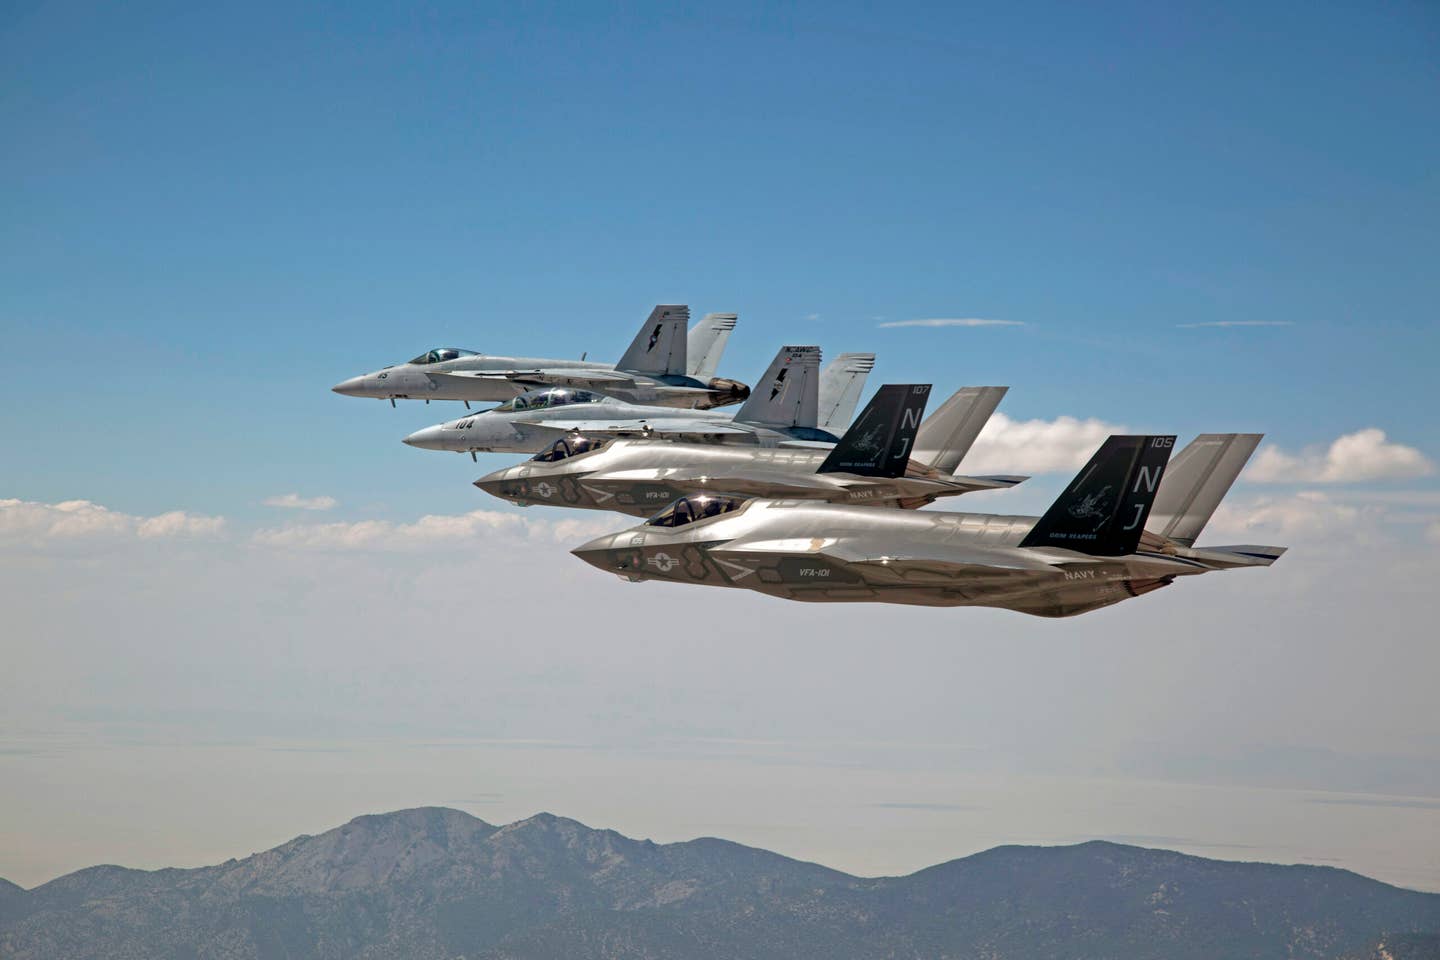 F-35Cs, attached to VFA-101 “Grim Reapers,” and F/A-18E/F Super Hornets attached to the Naval Aviation Warfighter Development Center (NAWDC) fly over Naval Air Station Fallon’s Range Training Complex. <em>U.S. Navy photo by Lt. Cmdr. Darin Russell/Released</em>